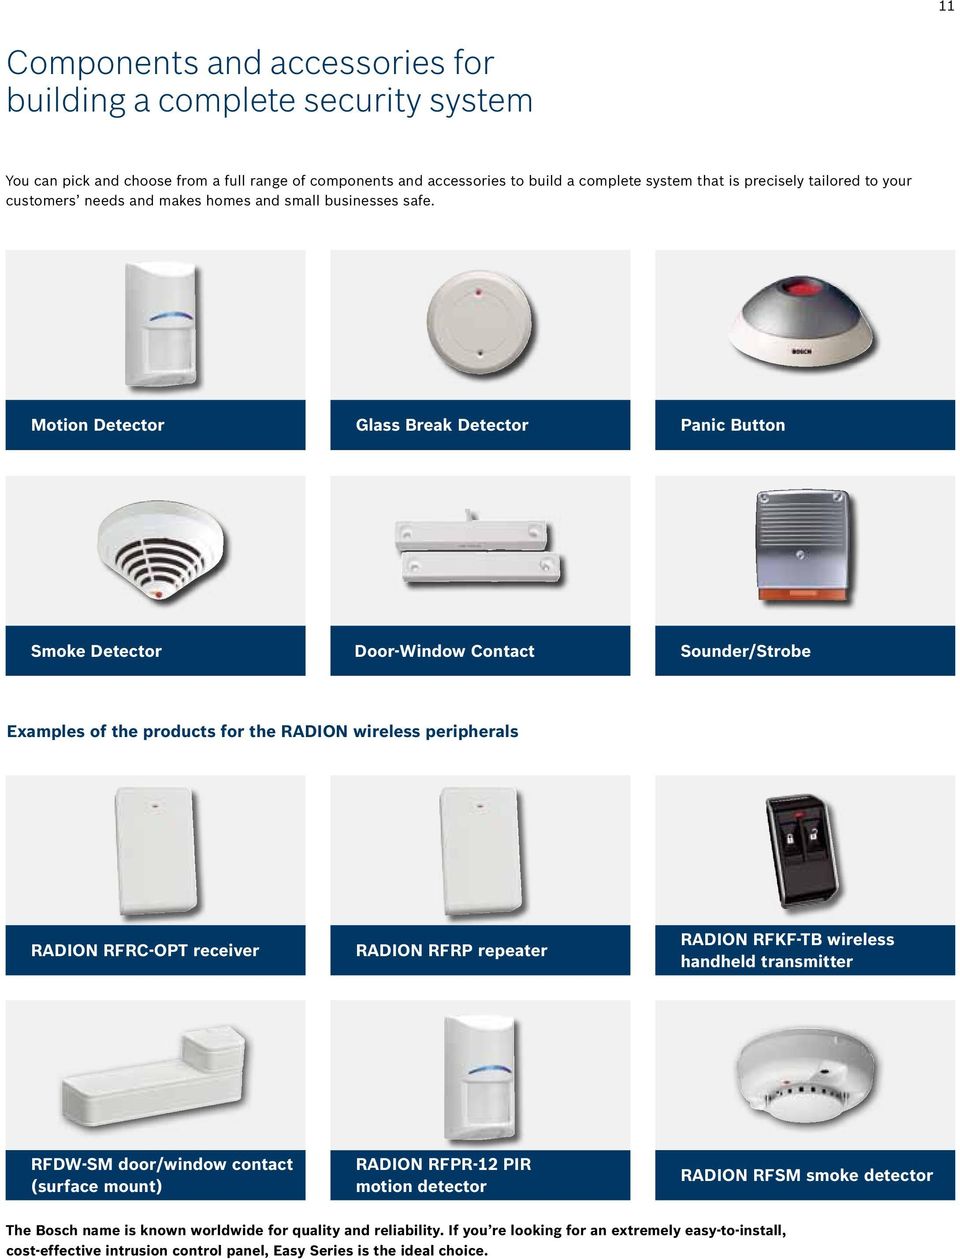 Motion Detector Glass Break Detector Panic Button Smoke Detector Door-Window Contact Sounder/Strobe Examples of the products for the RADION wireless peripherals RADION RFRC-OPT receiver RADION RFRP